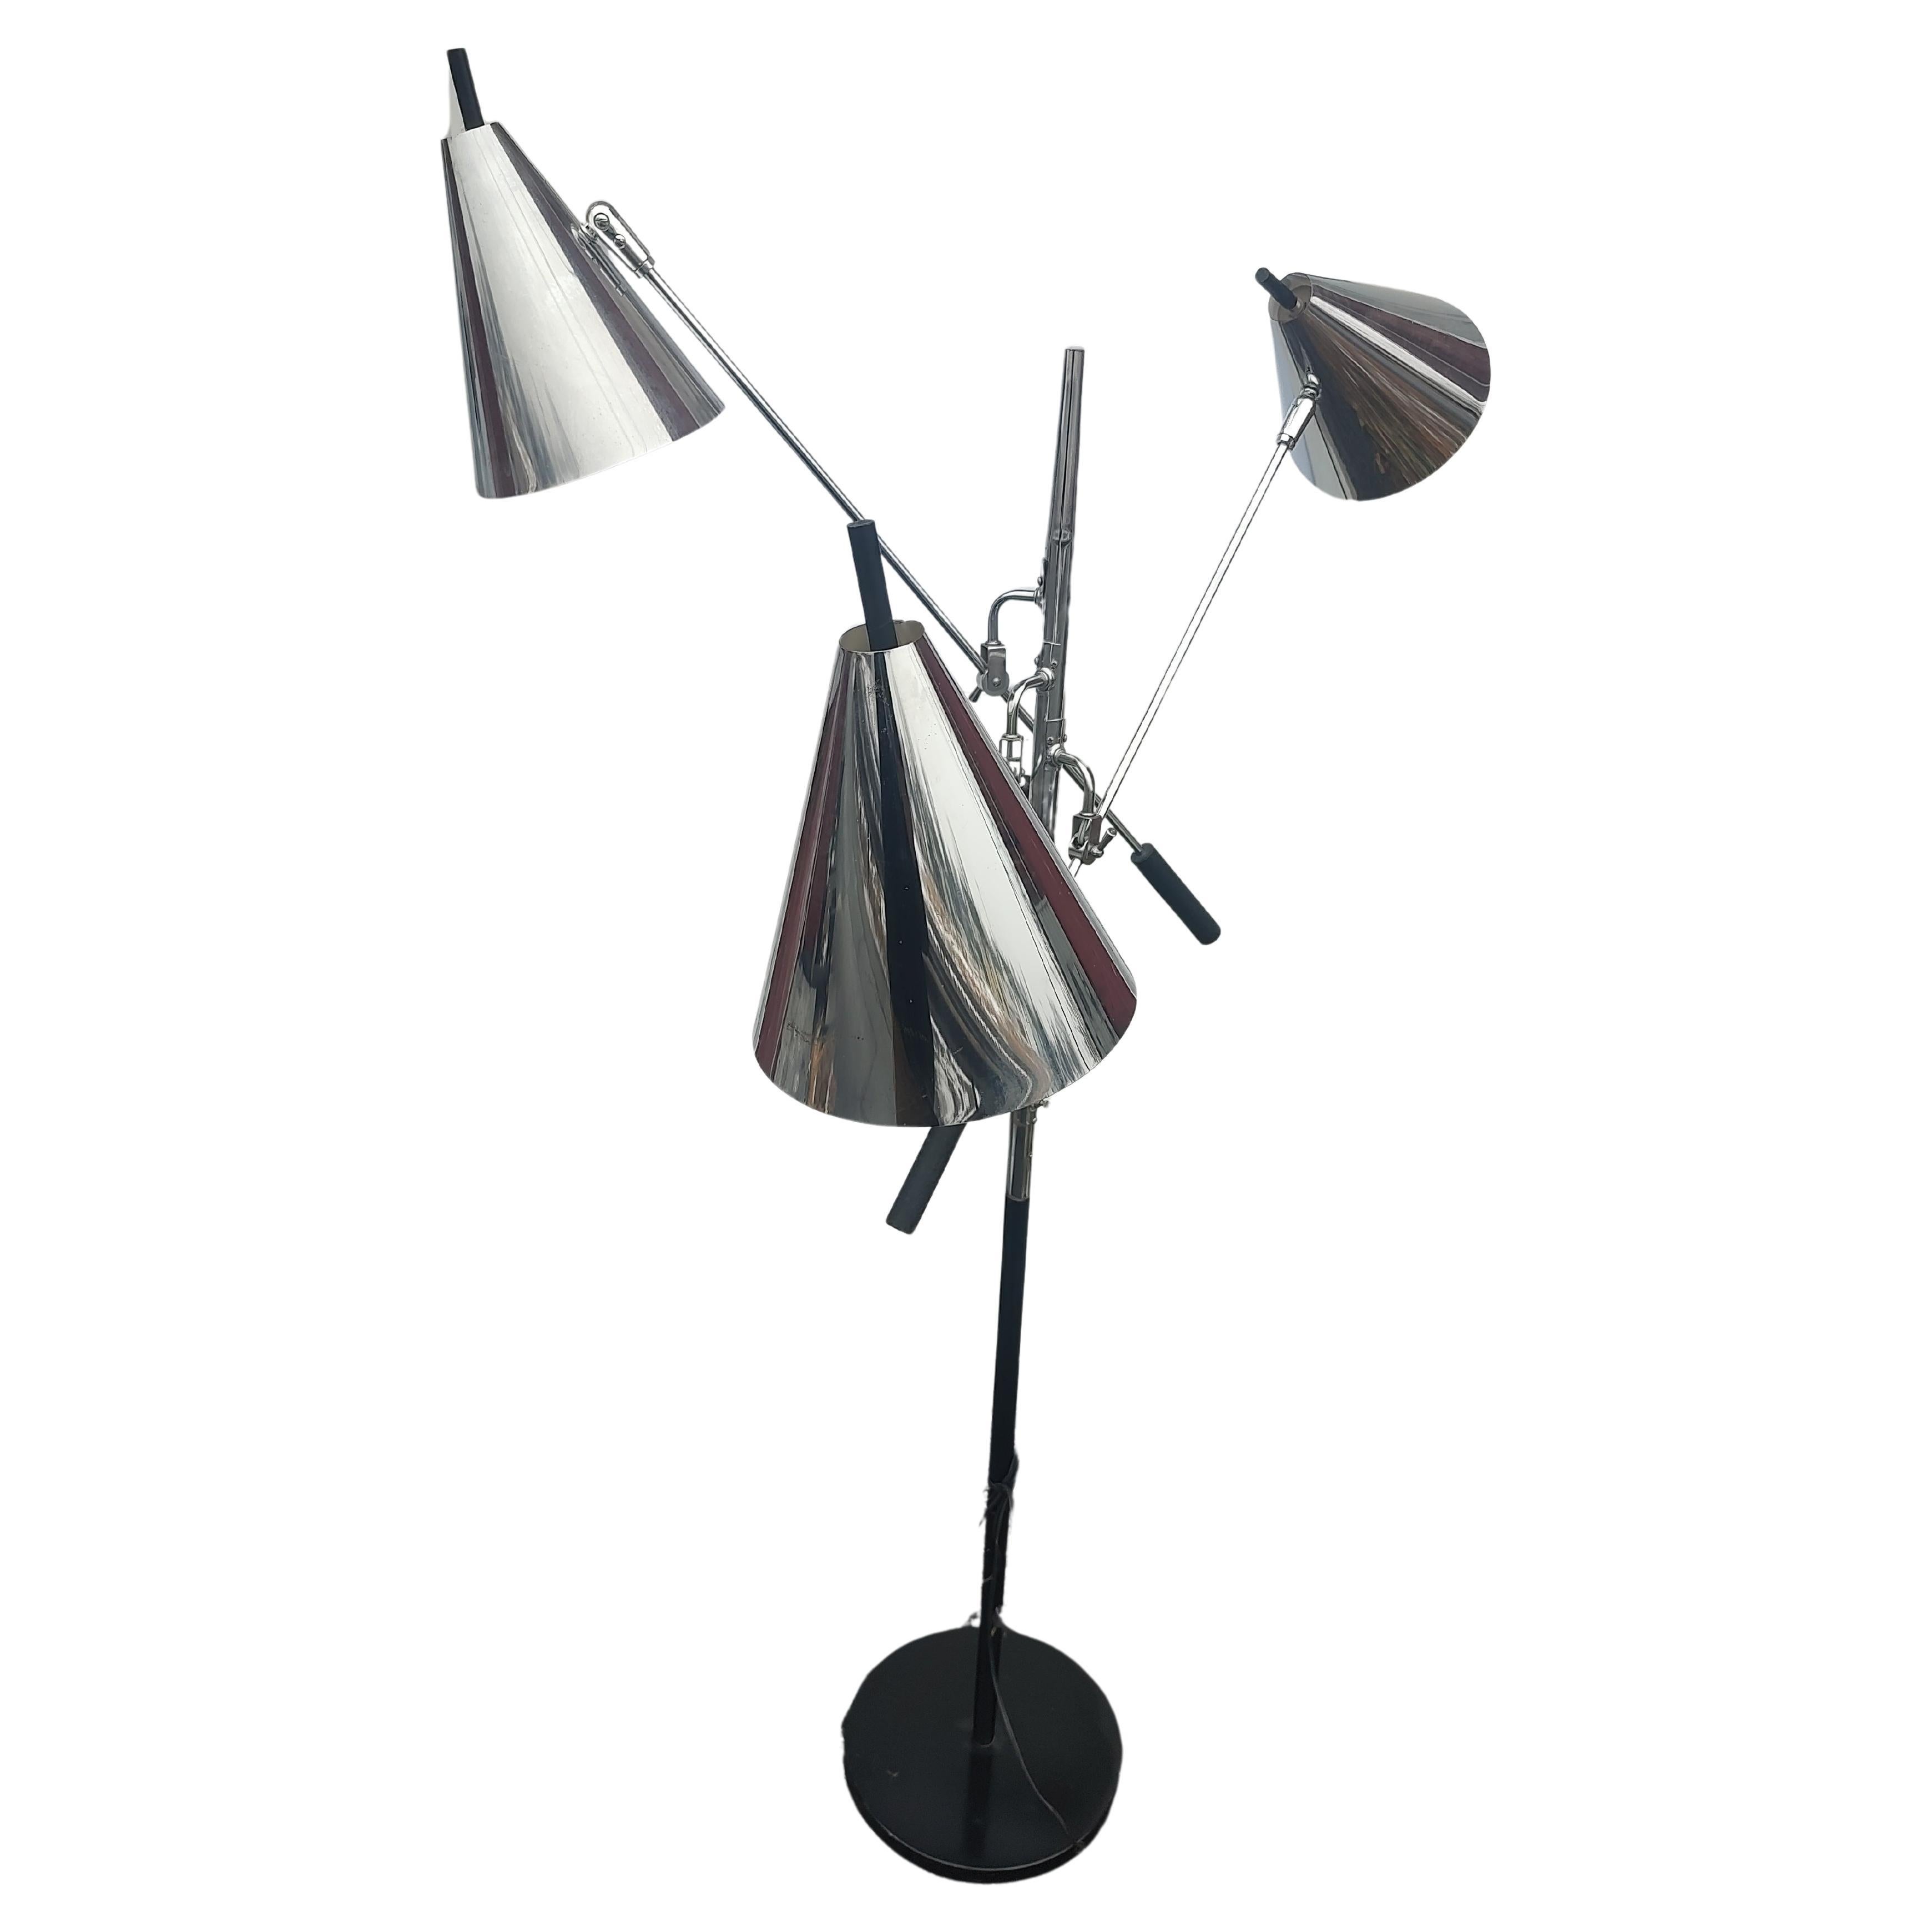 Mid Century Modern Sculptural Triennial Floor Lamp Attributed to Gino Sarfatti In Good Condition For Sale In Port Jervis, NY